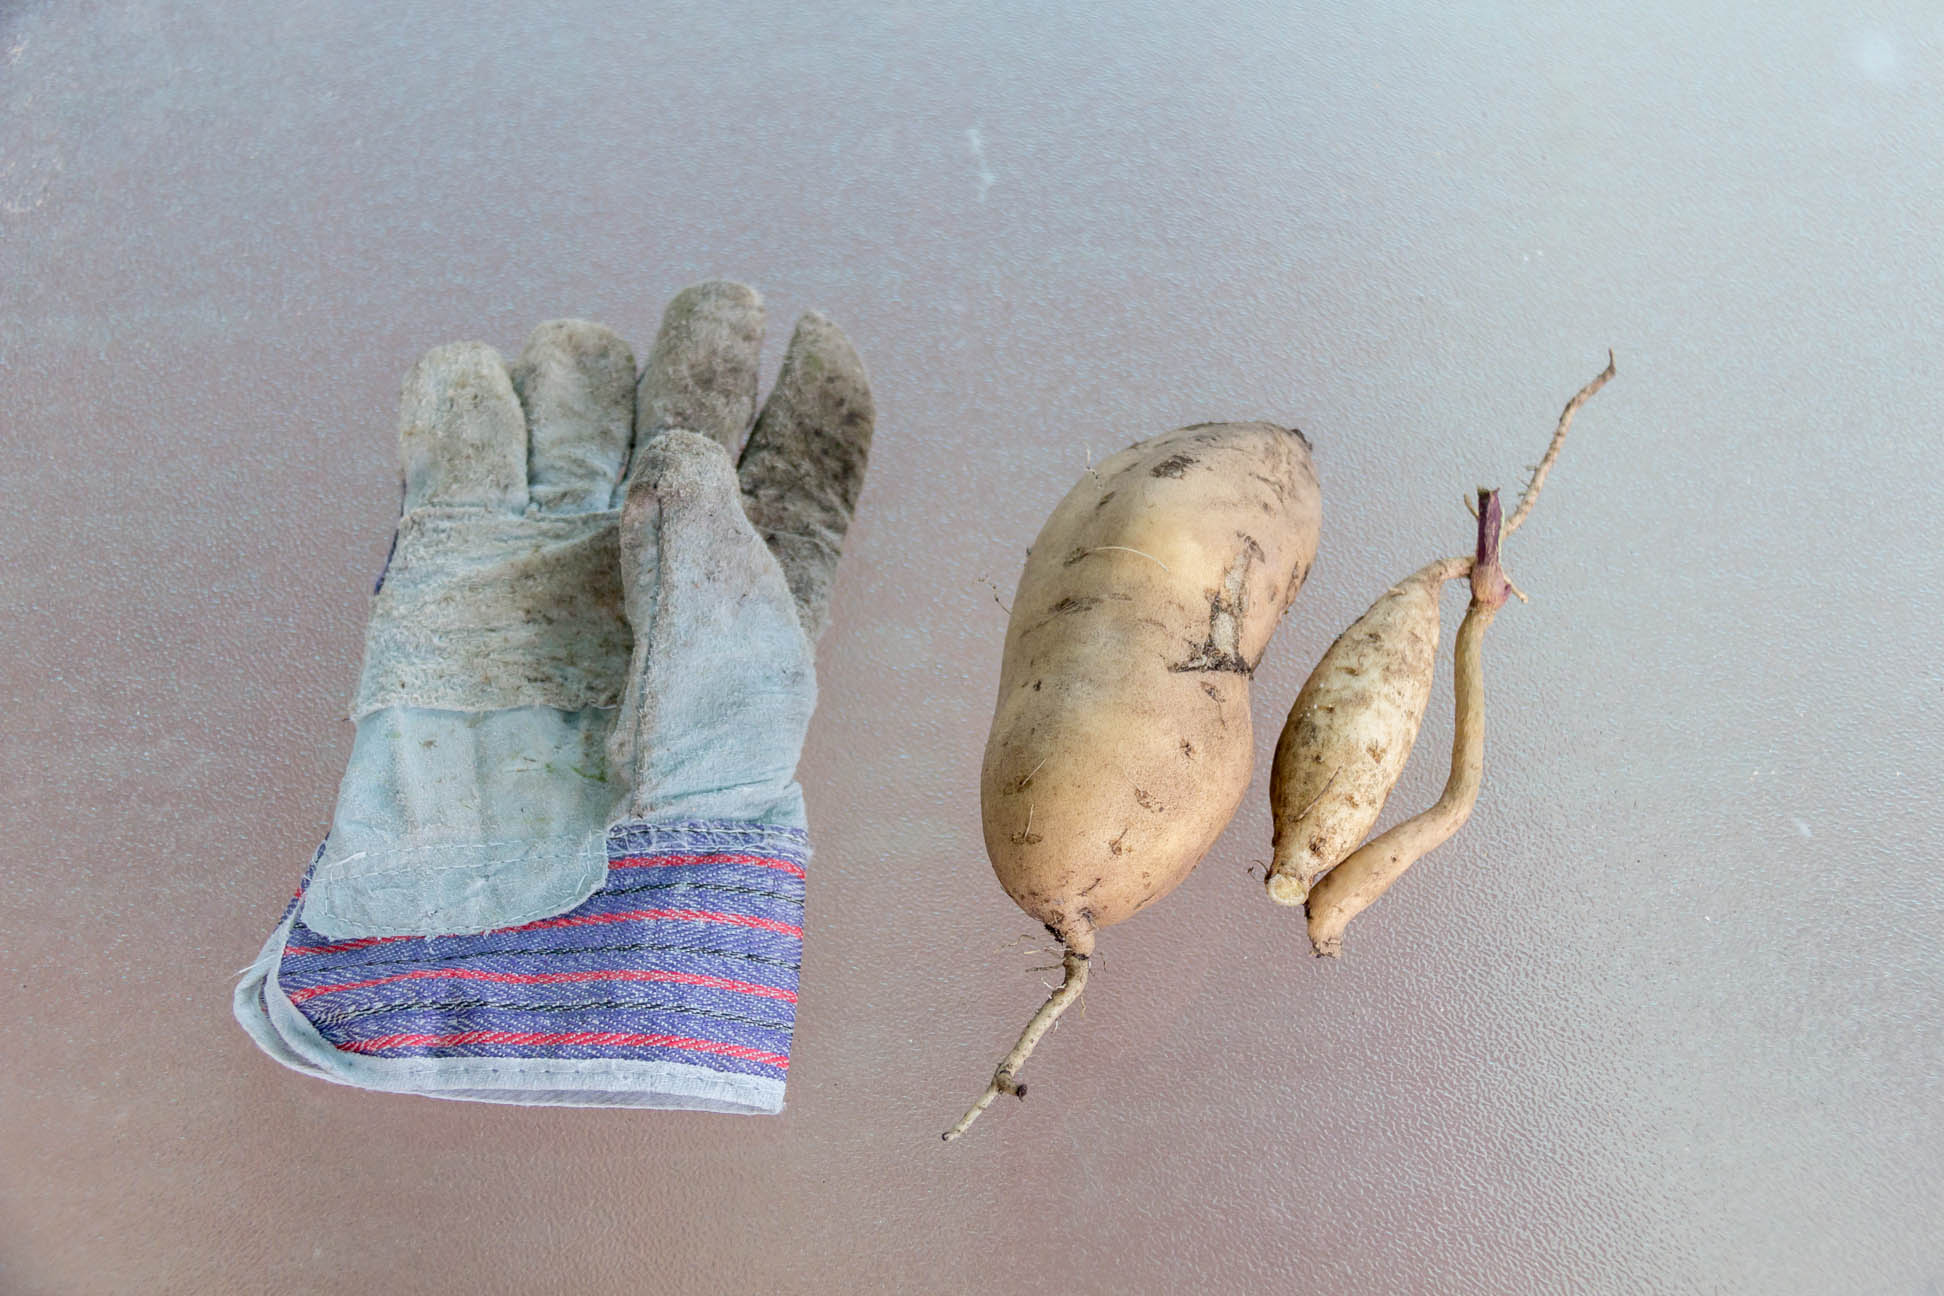 This is the biggest harvest we have had, NO idea how old this harvest is, came with the house. So excited that we had a home which had potato ground cover=)